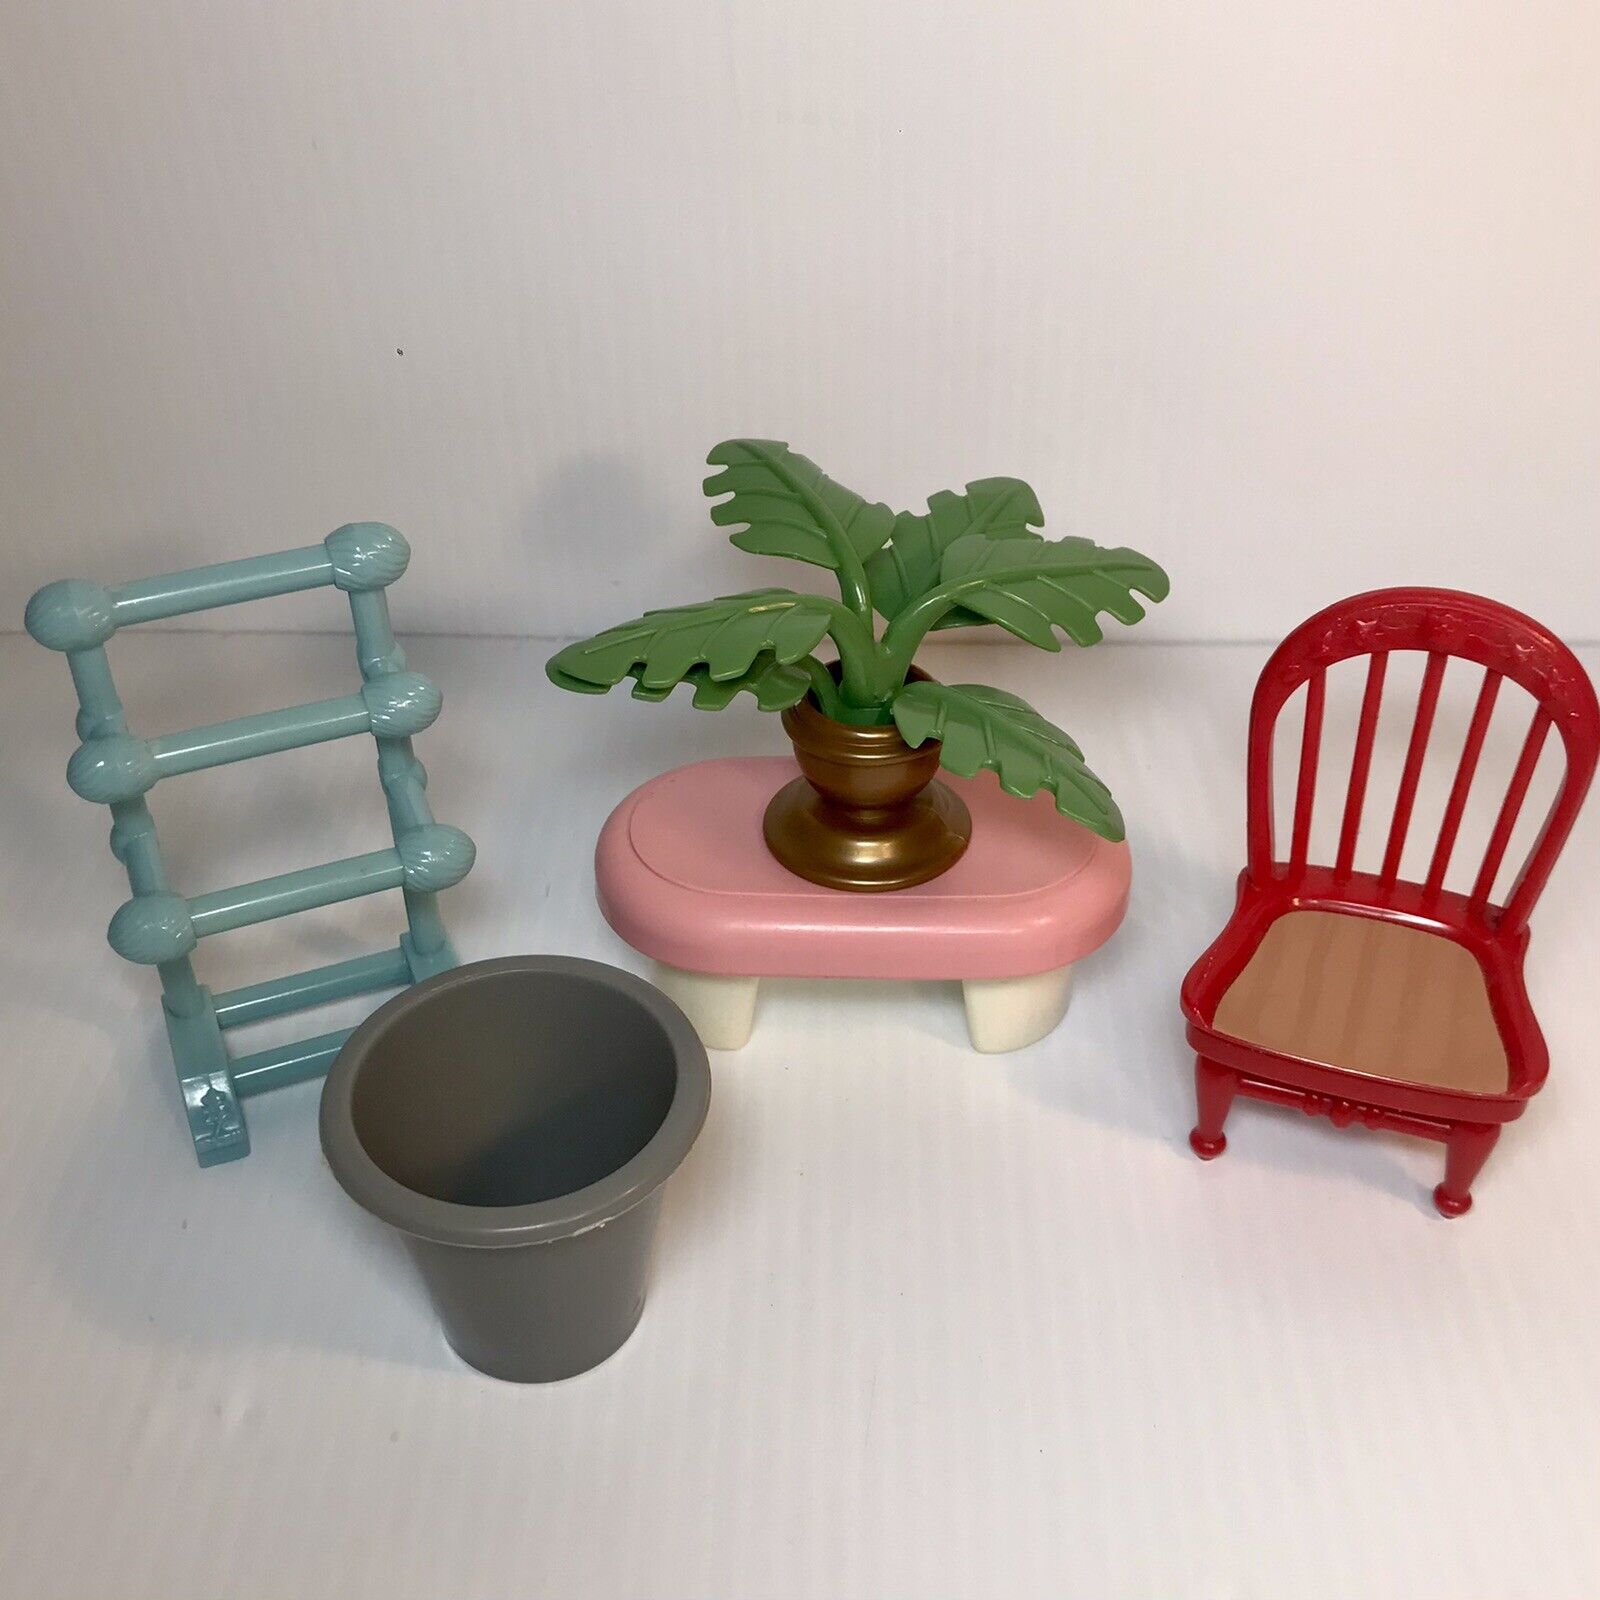 Fisher Price Dollhouse Furniture Lot - Plant Wastebasket Towel Rack Chair Table